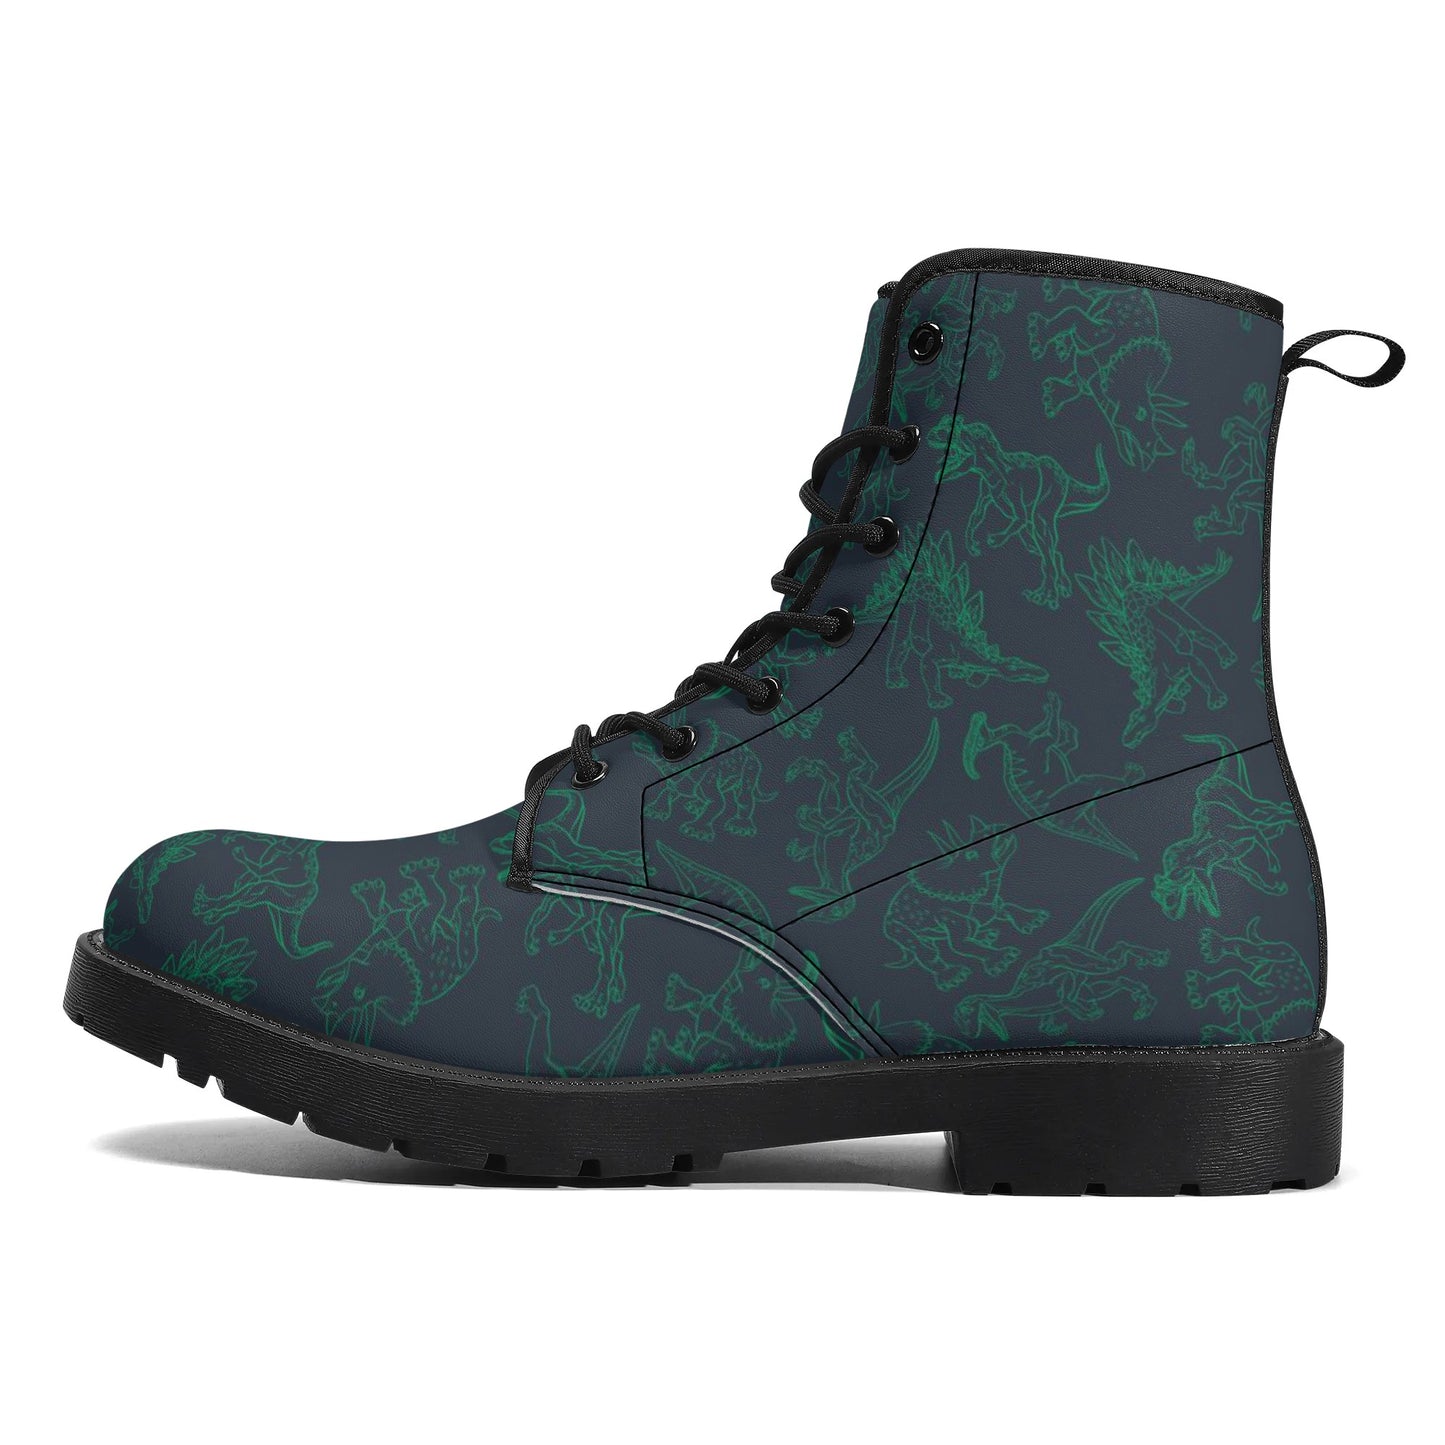 Dino Men Leather Boots, Dinosaur Green Vegan Lace Up Adult Shoes Hiking Festival Black Ankle Combat Work Winter Waterproof Guys Male